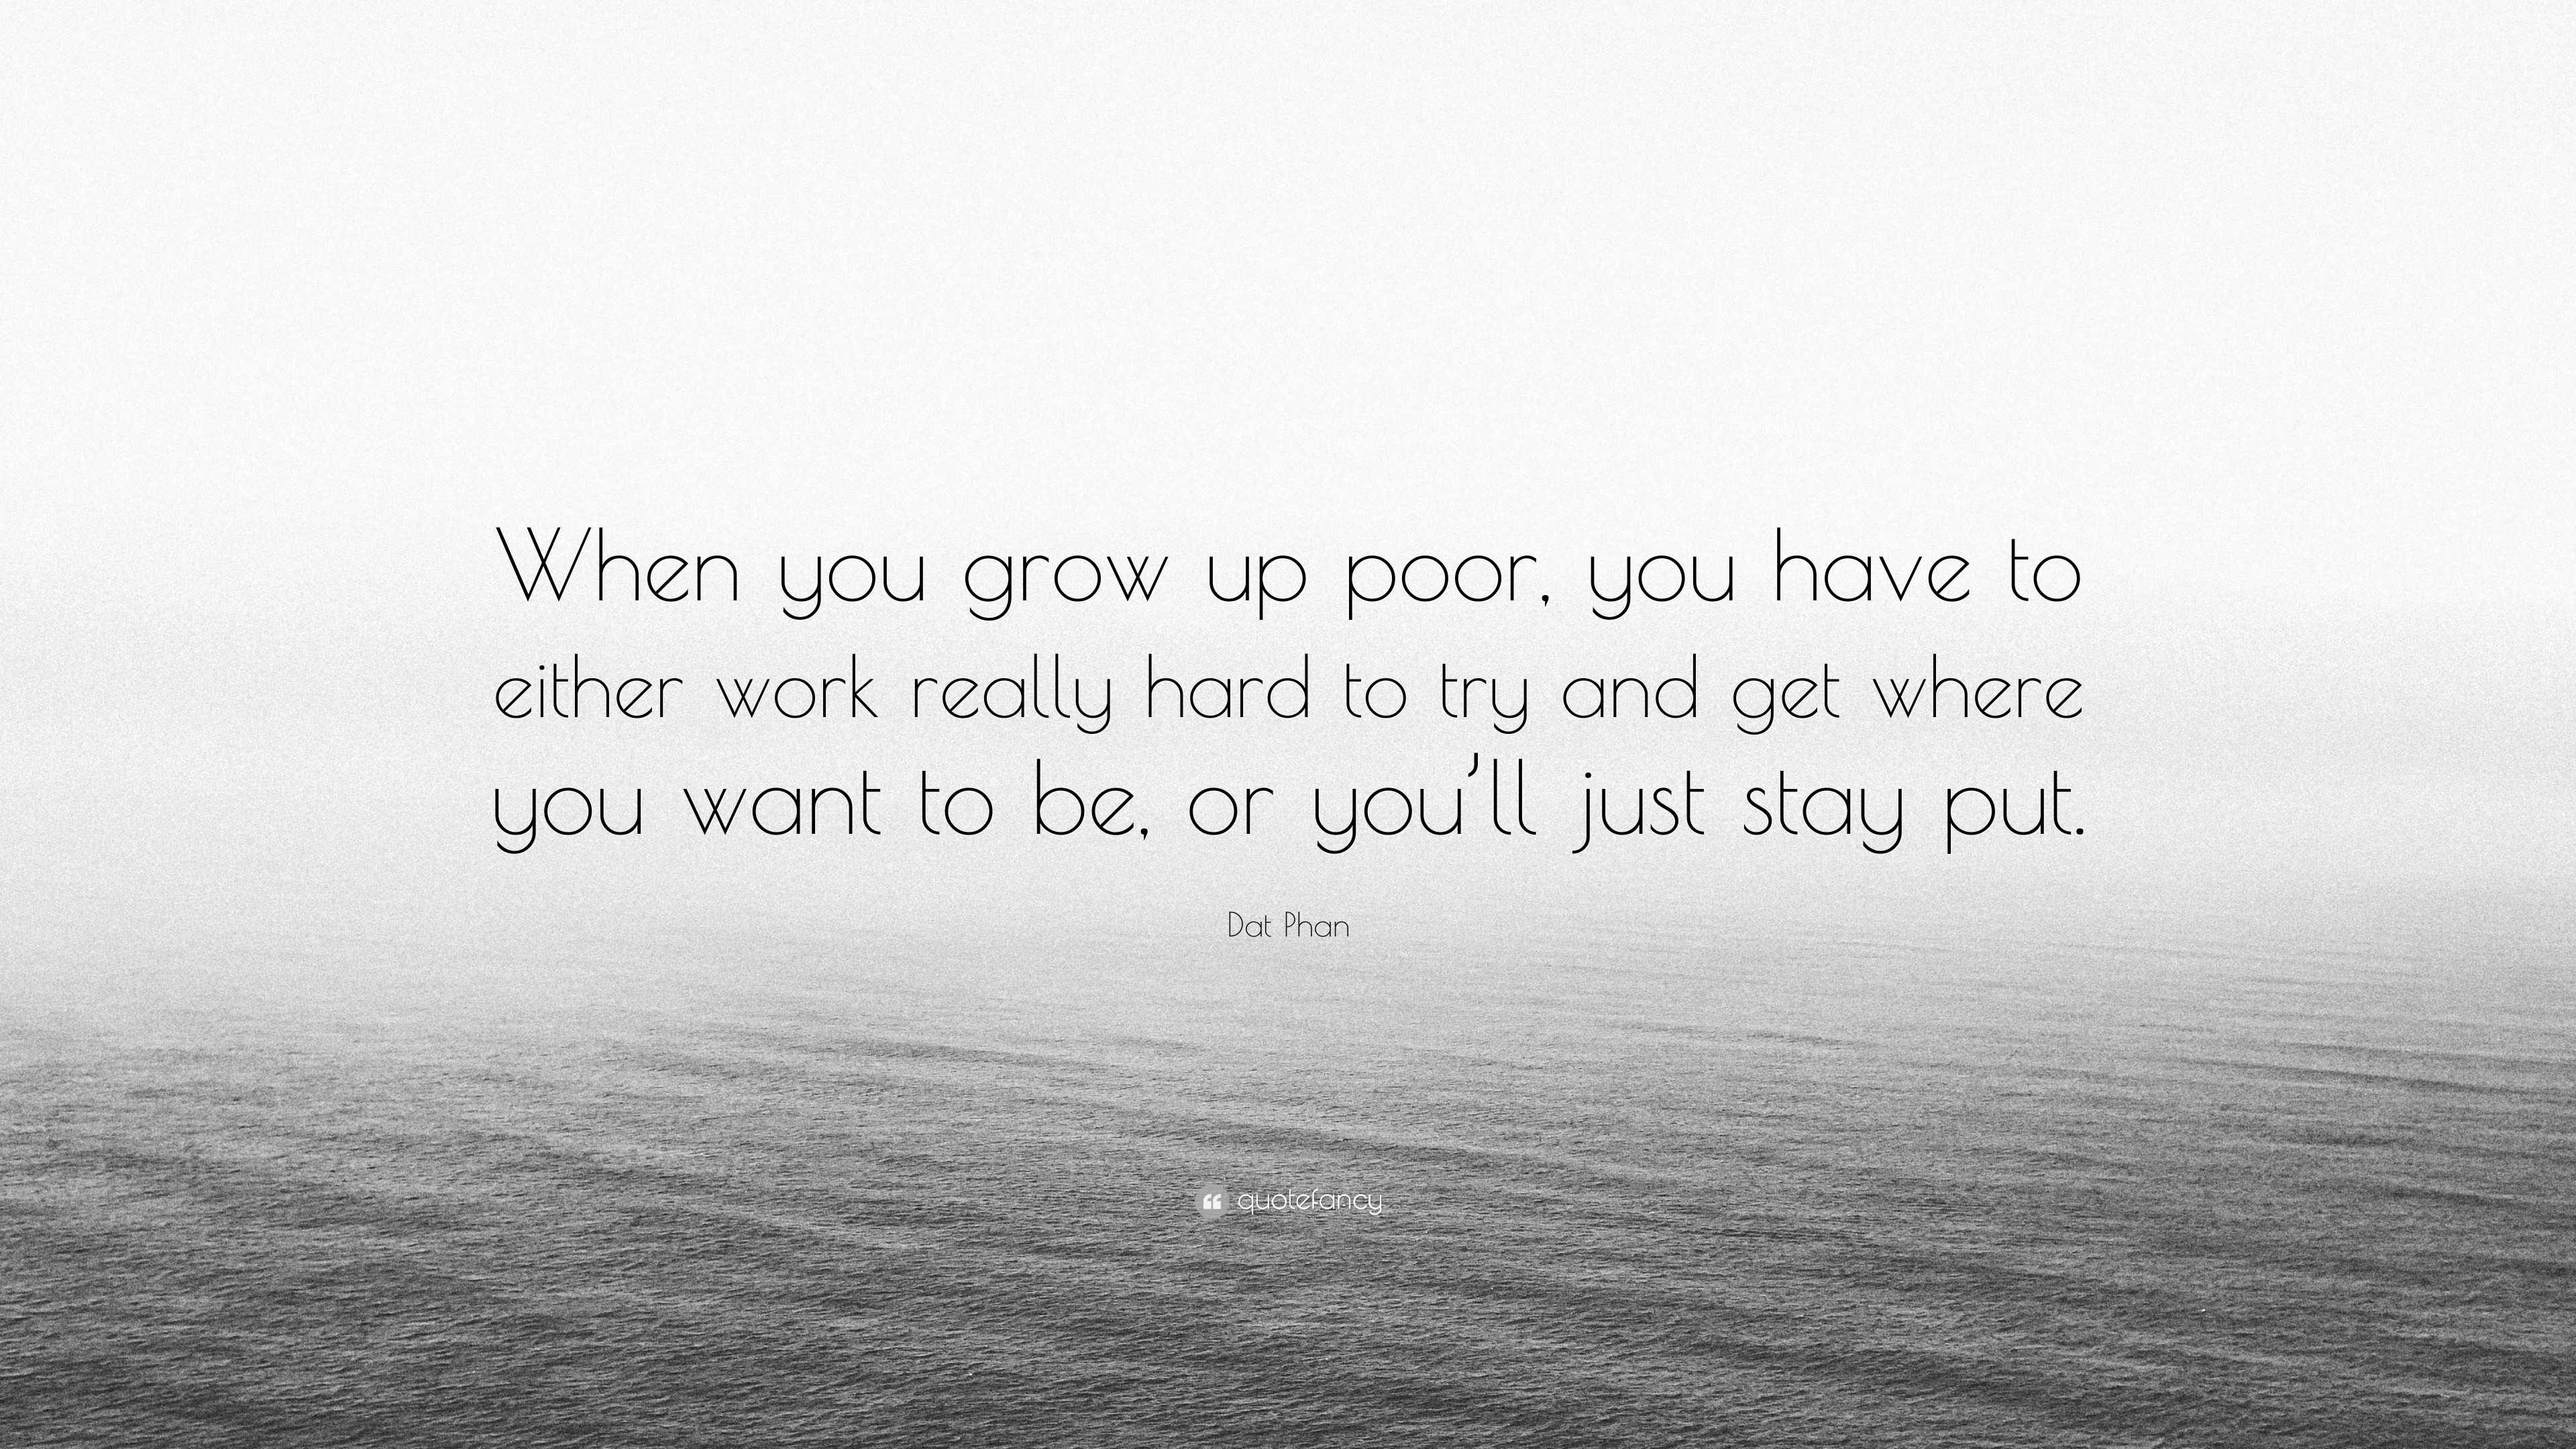 growing up poor gave me a good work ethic